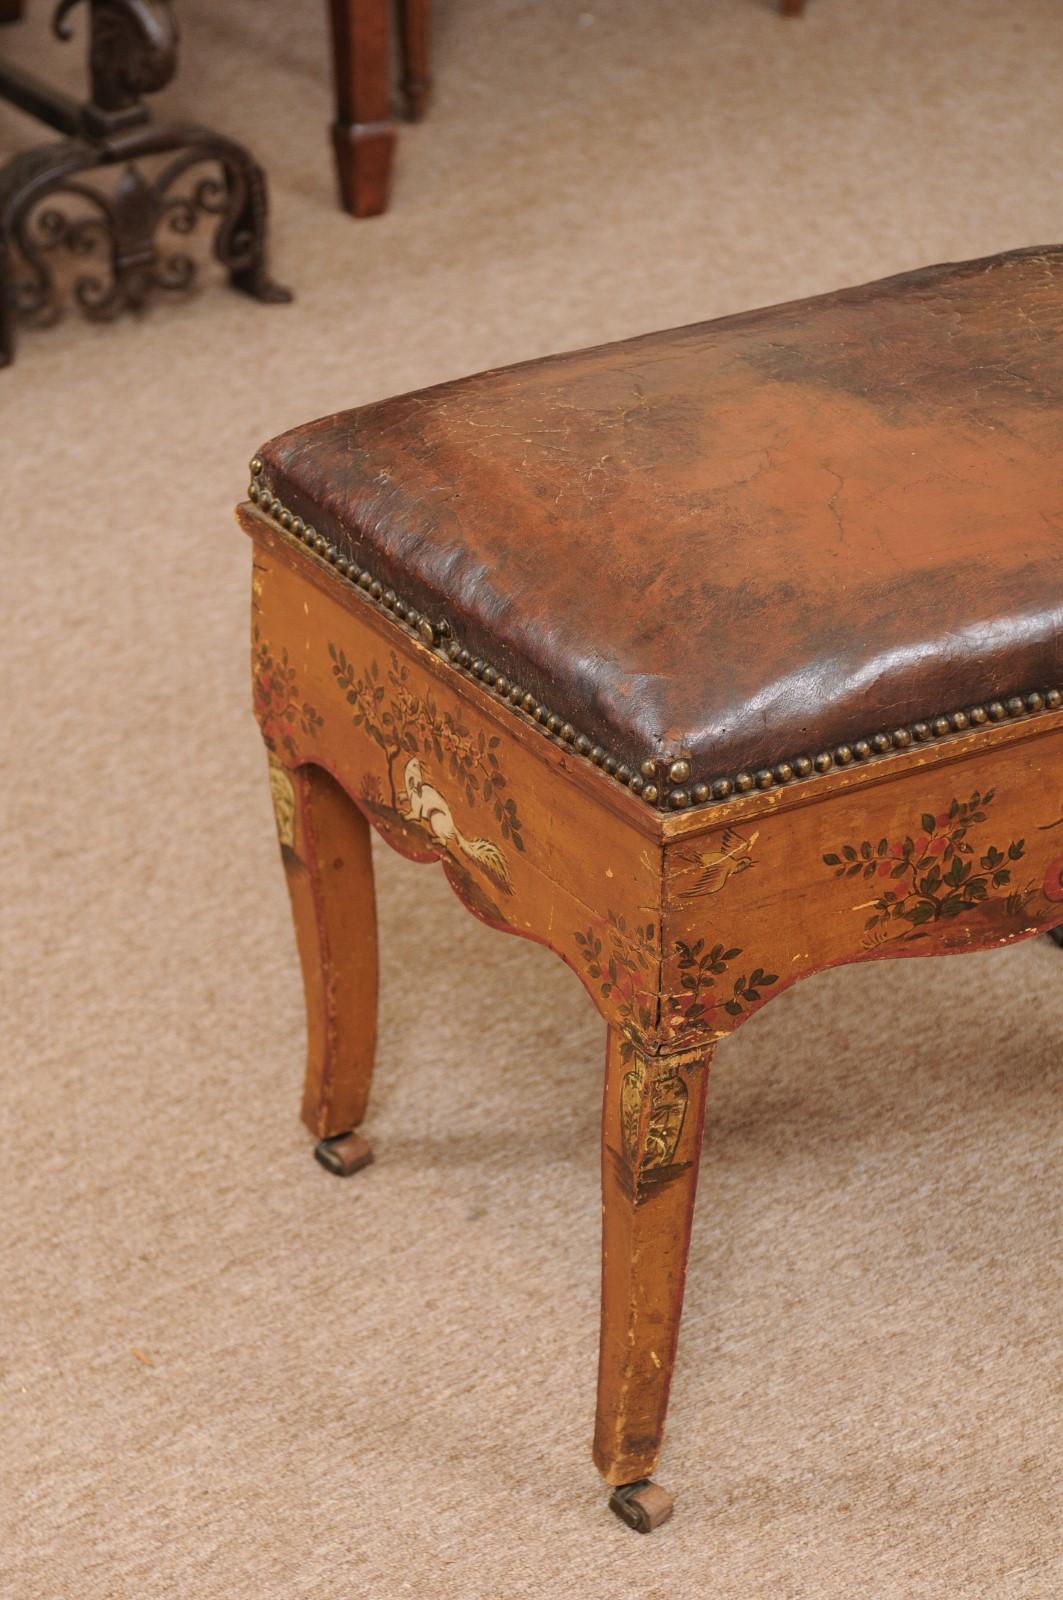 18th Century Italian Stool with Painted Decoration & Leather Upholstered Seat 1